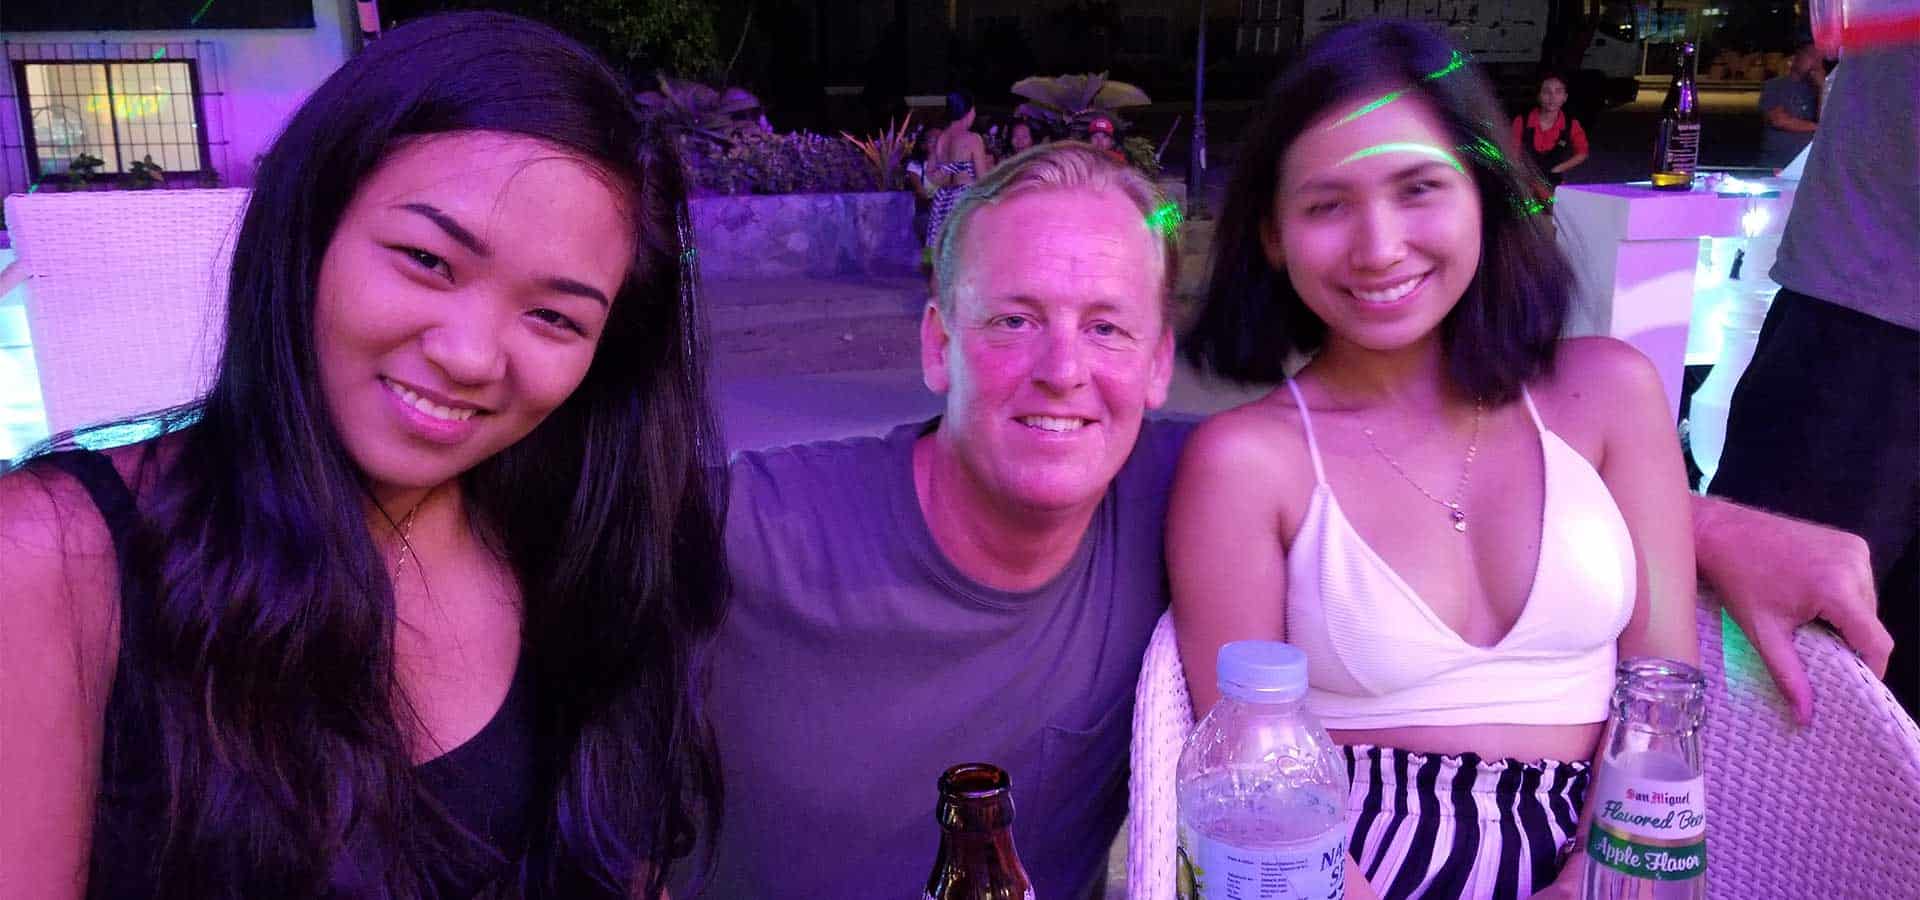 Tips And Warnings About International Online Dating - My Philippines Adventures